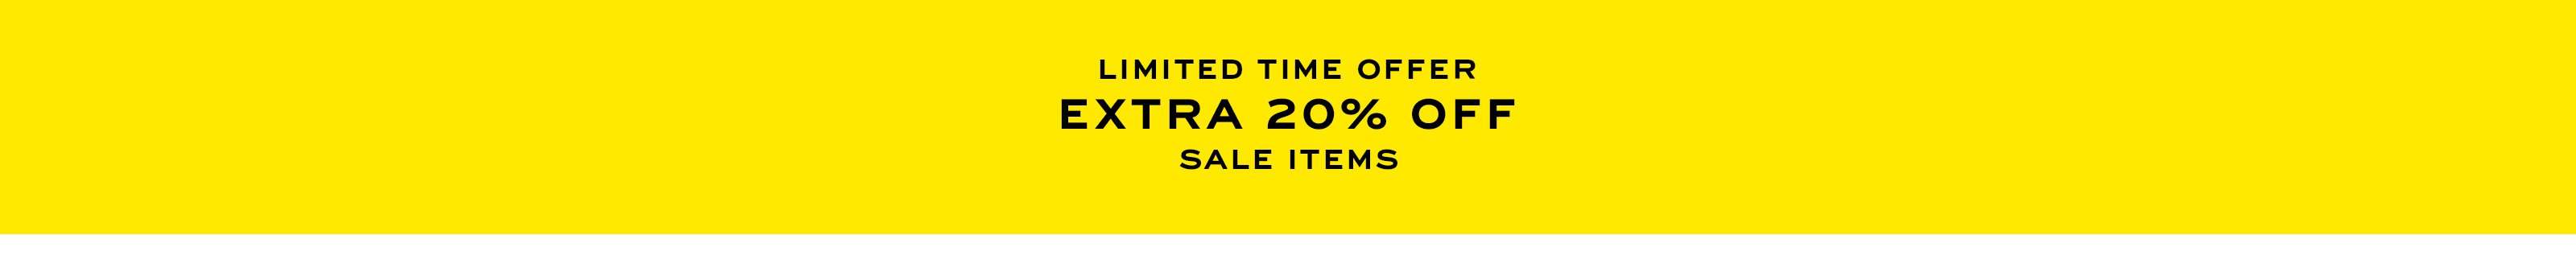 Limited Time Offer Extra 20% Off Sale Items